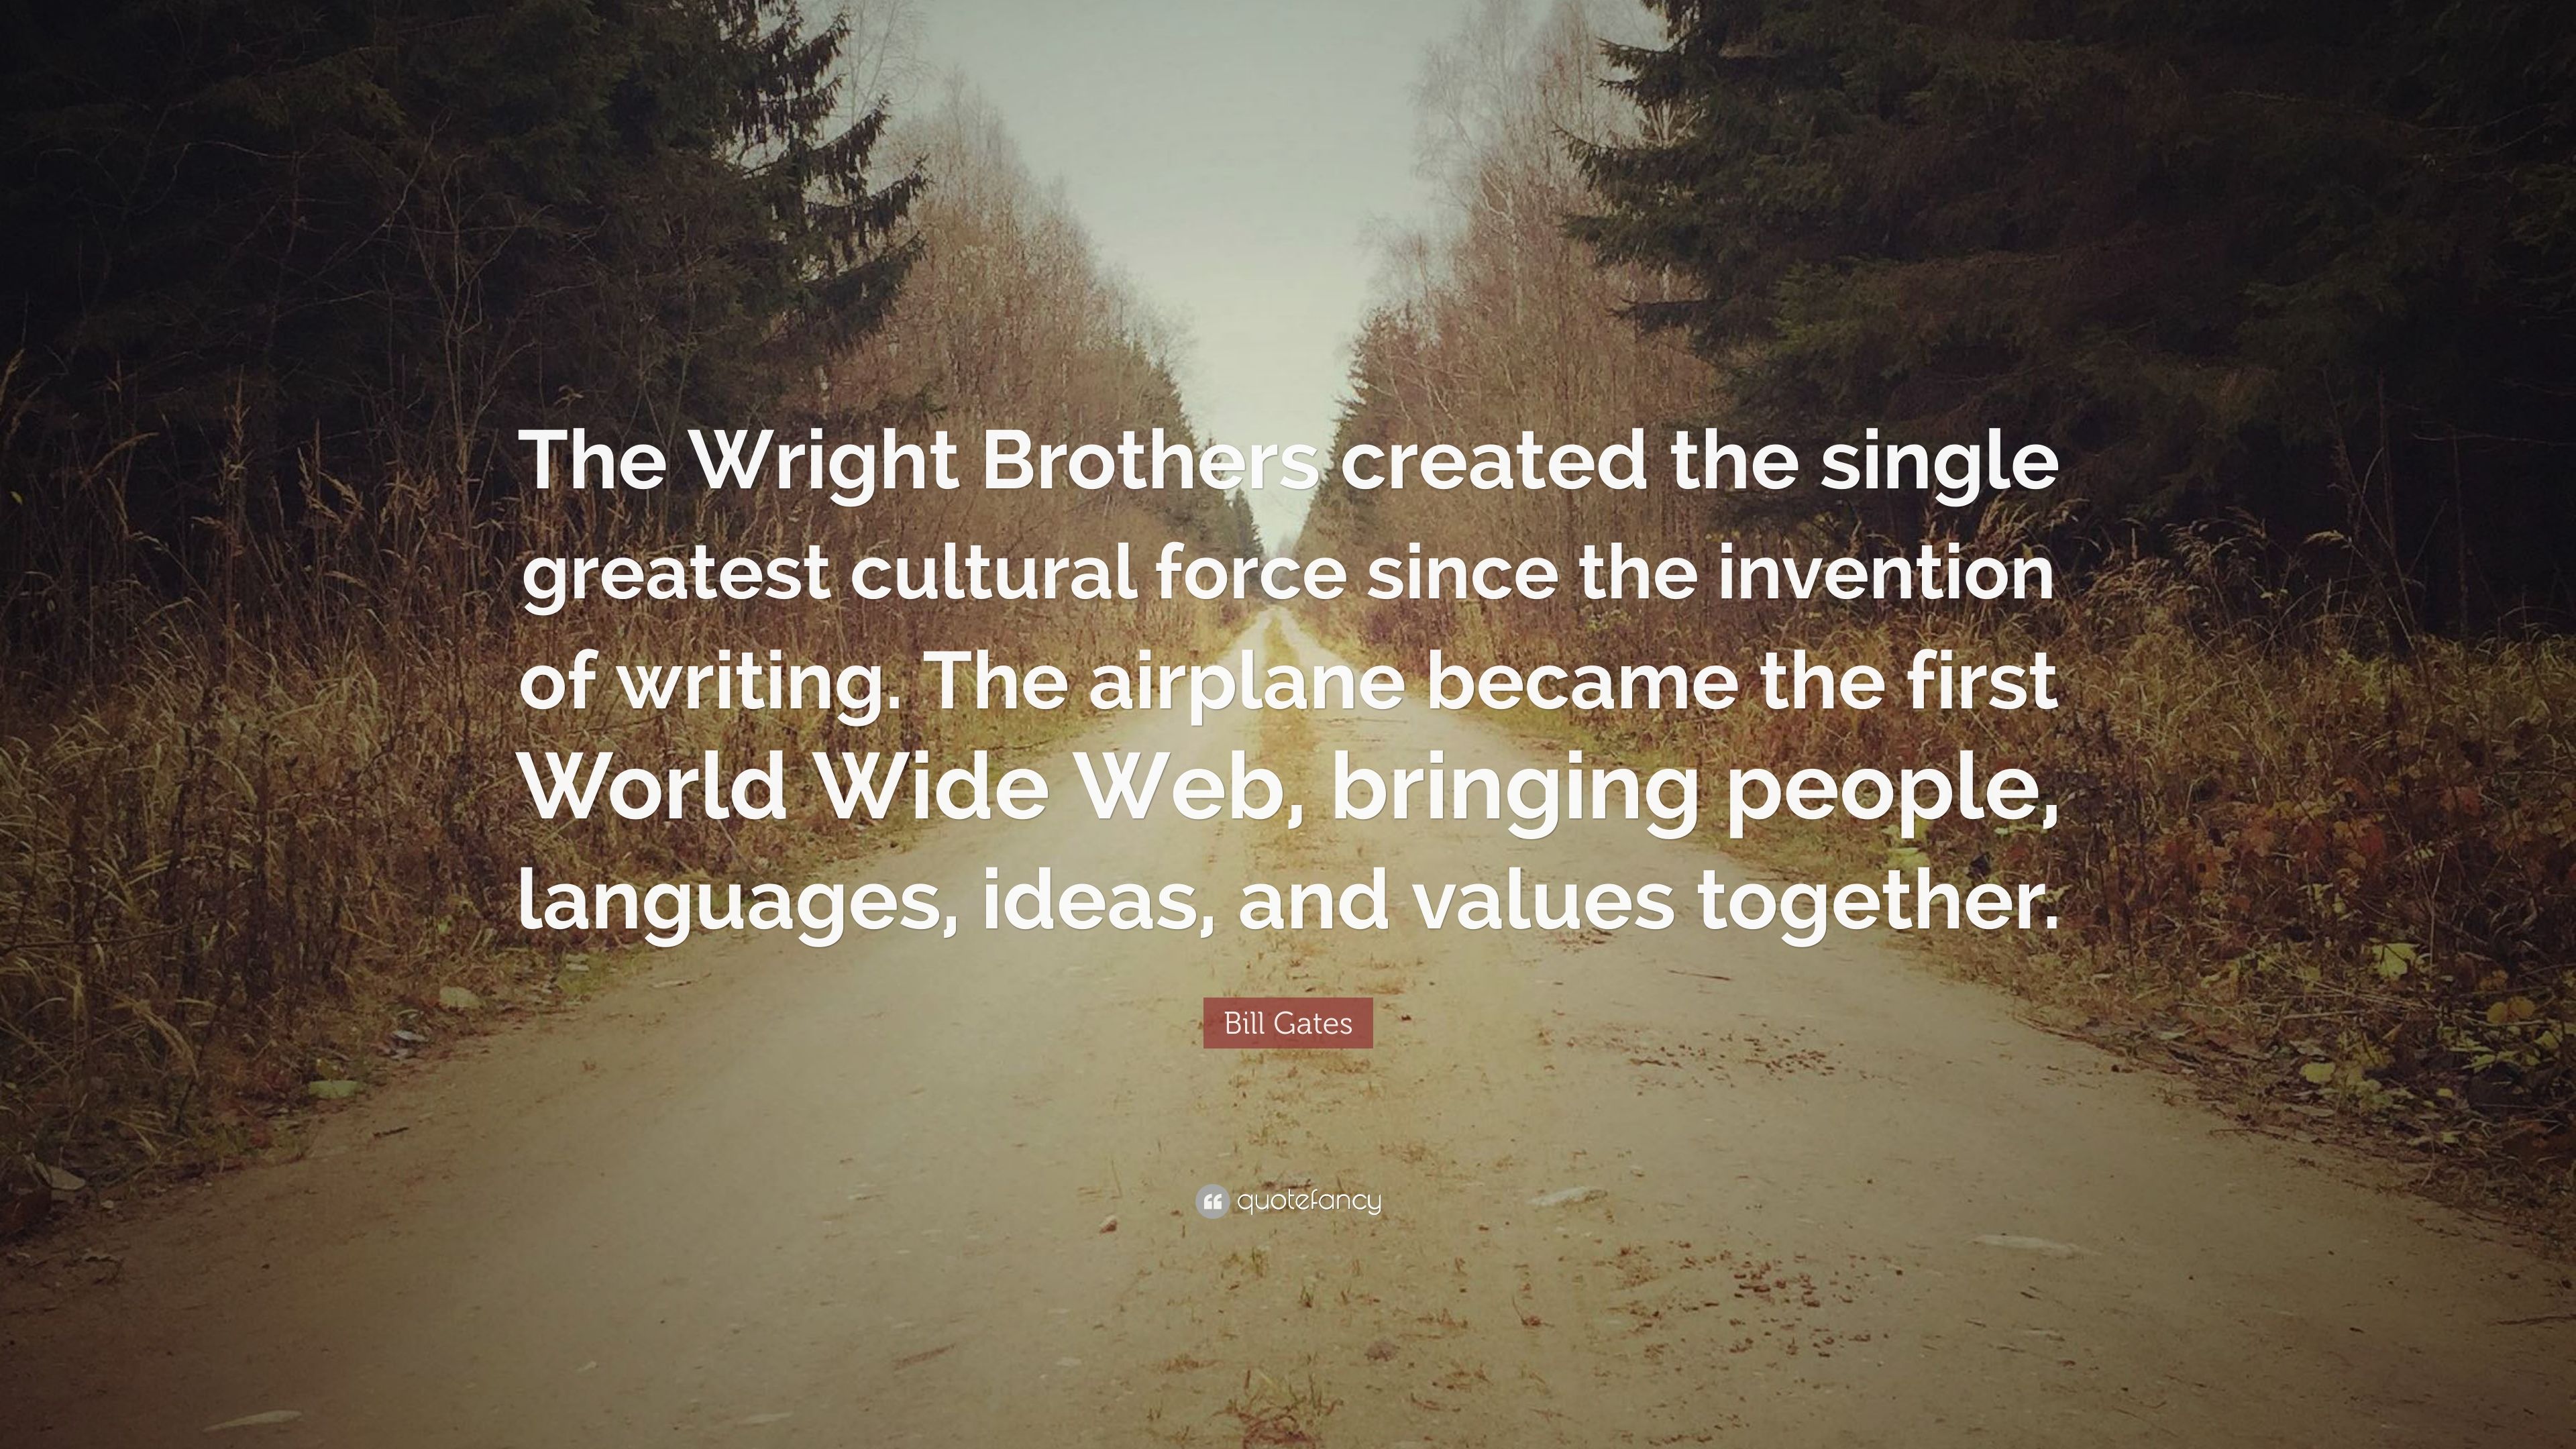 Bill Gates Quote: “The Wright Brothers created the single greatest cultural force since the invention of writing. The airplane became the f.” (12 wallpaper)